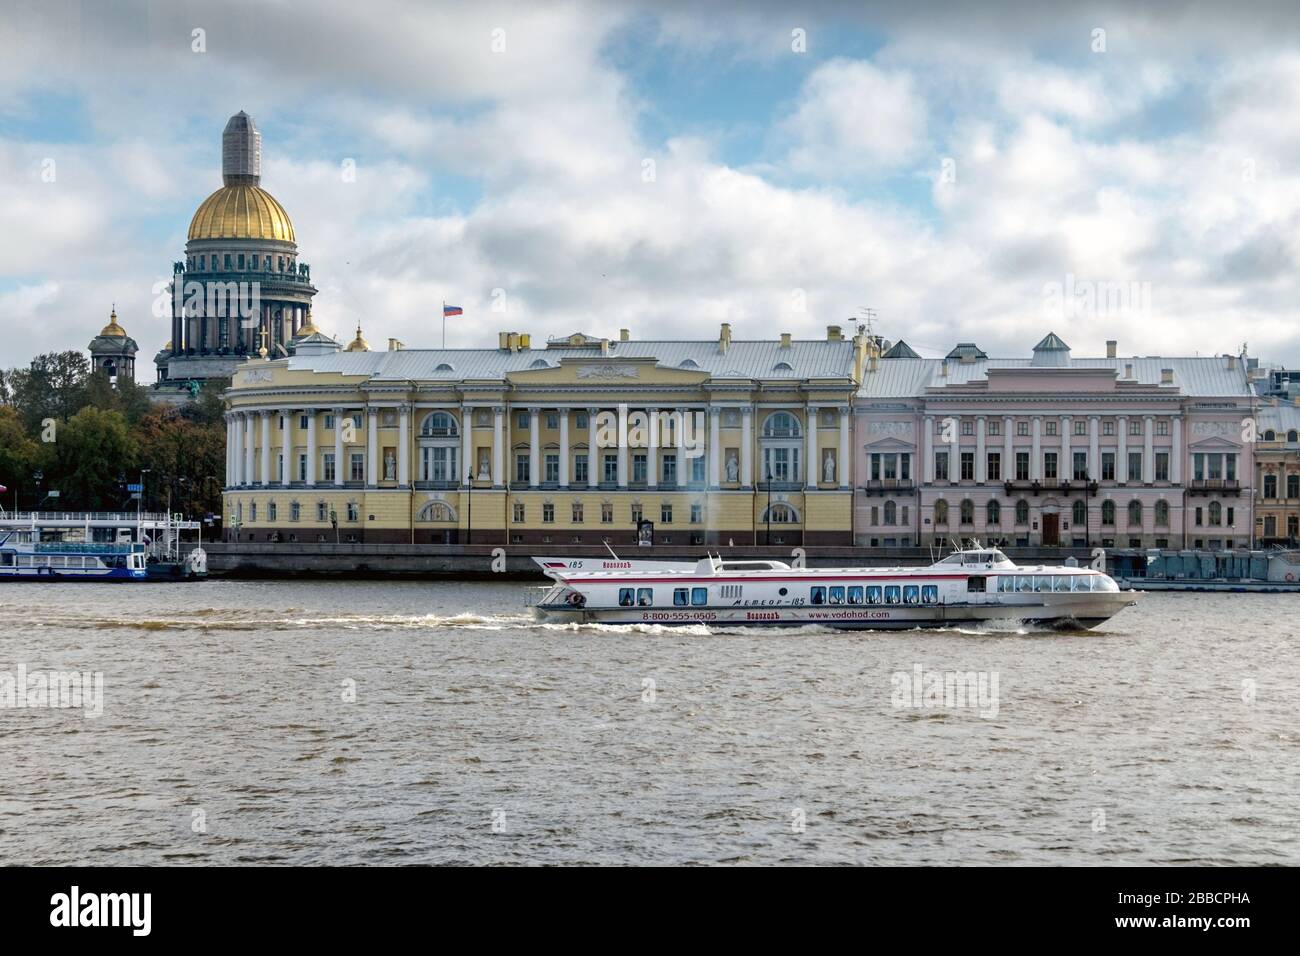 Sightseeing boat on the Neva river in view of the English embankment and St. Isaac's Cathedral, St. Petersburg, Russia Stock Photo